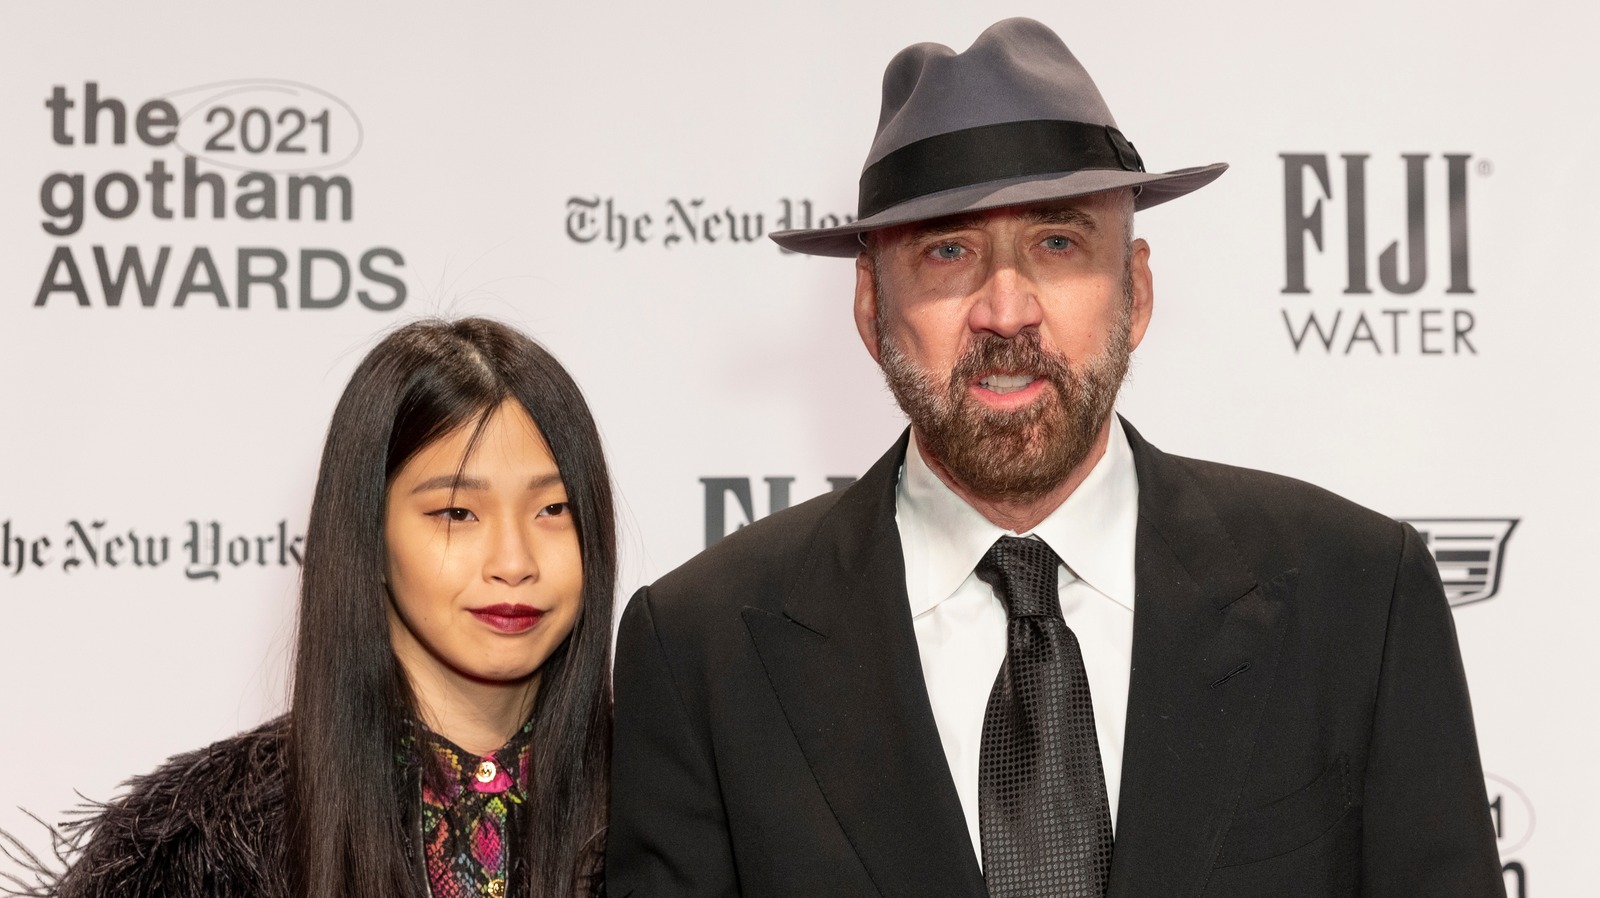 What To Know About Nicolas Cage's Wife, Riko Shibata (And Their Age Gap)